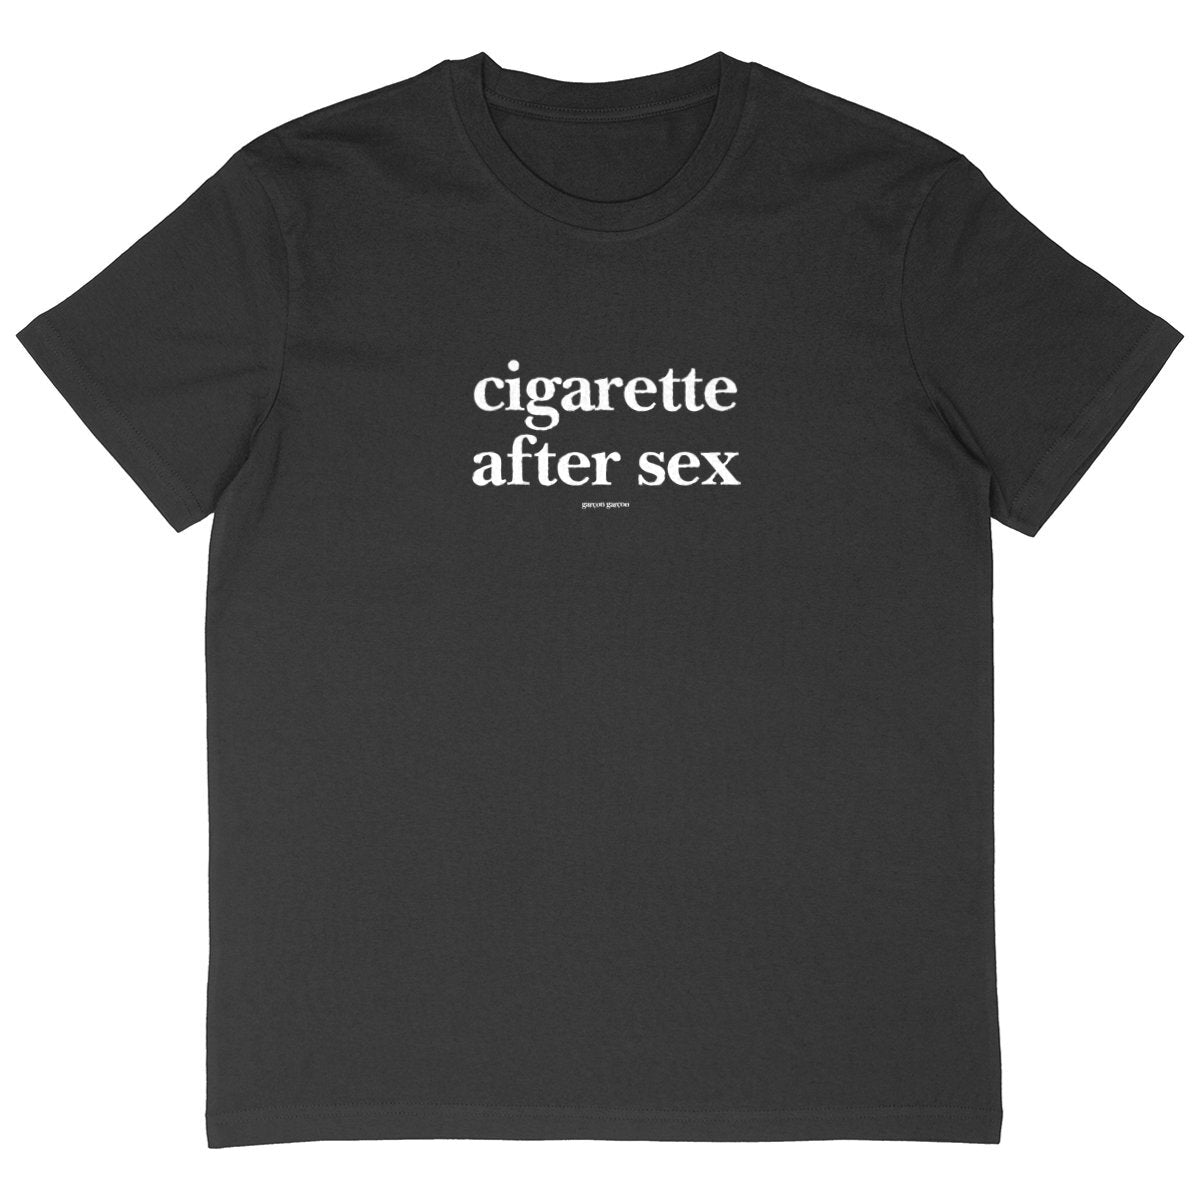 cigarette after sex tee oversized. garçon garçon tee oversize BLACK. Dive into the essence of Parisian cool with this oversized tee. The subtle 'garçon garçon' signature whispers a chic narrative, offering a slice of the city's famed elegance. Perfect for those who speak style with simplicity.